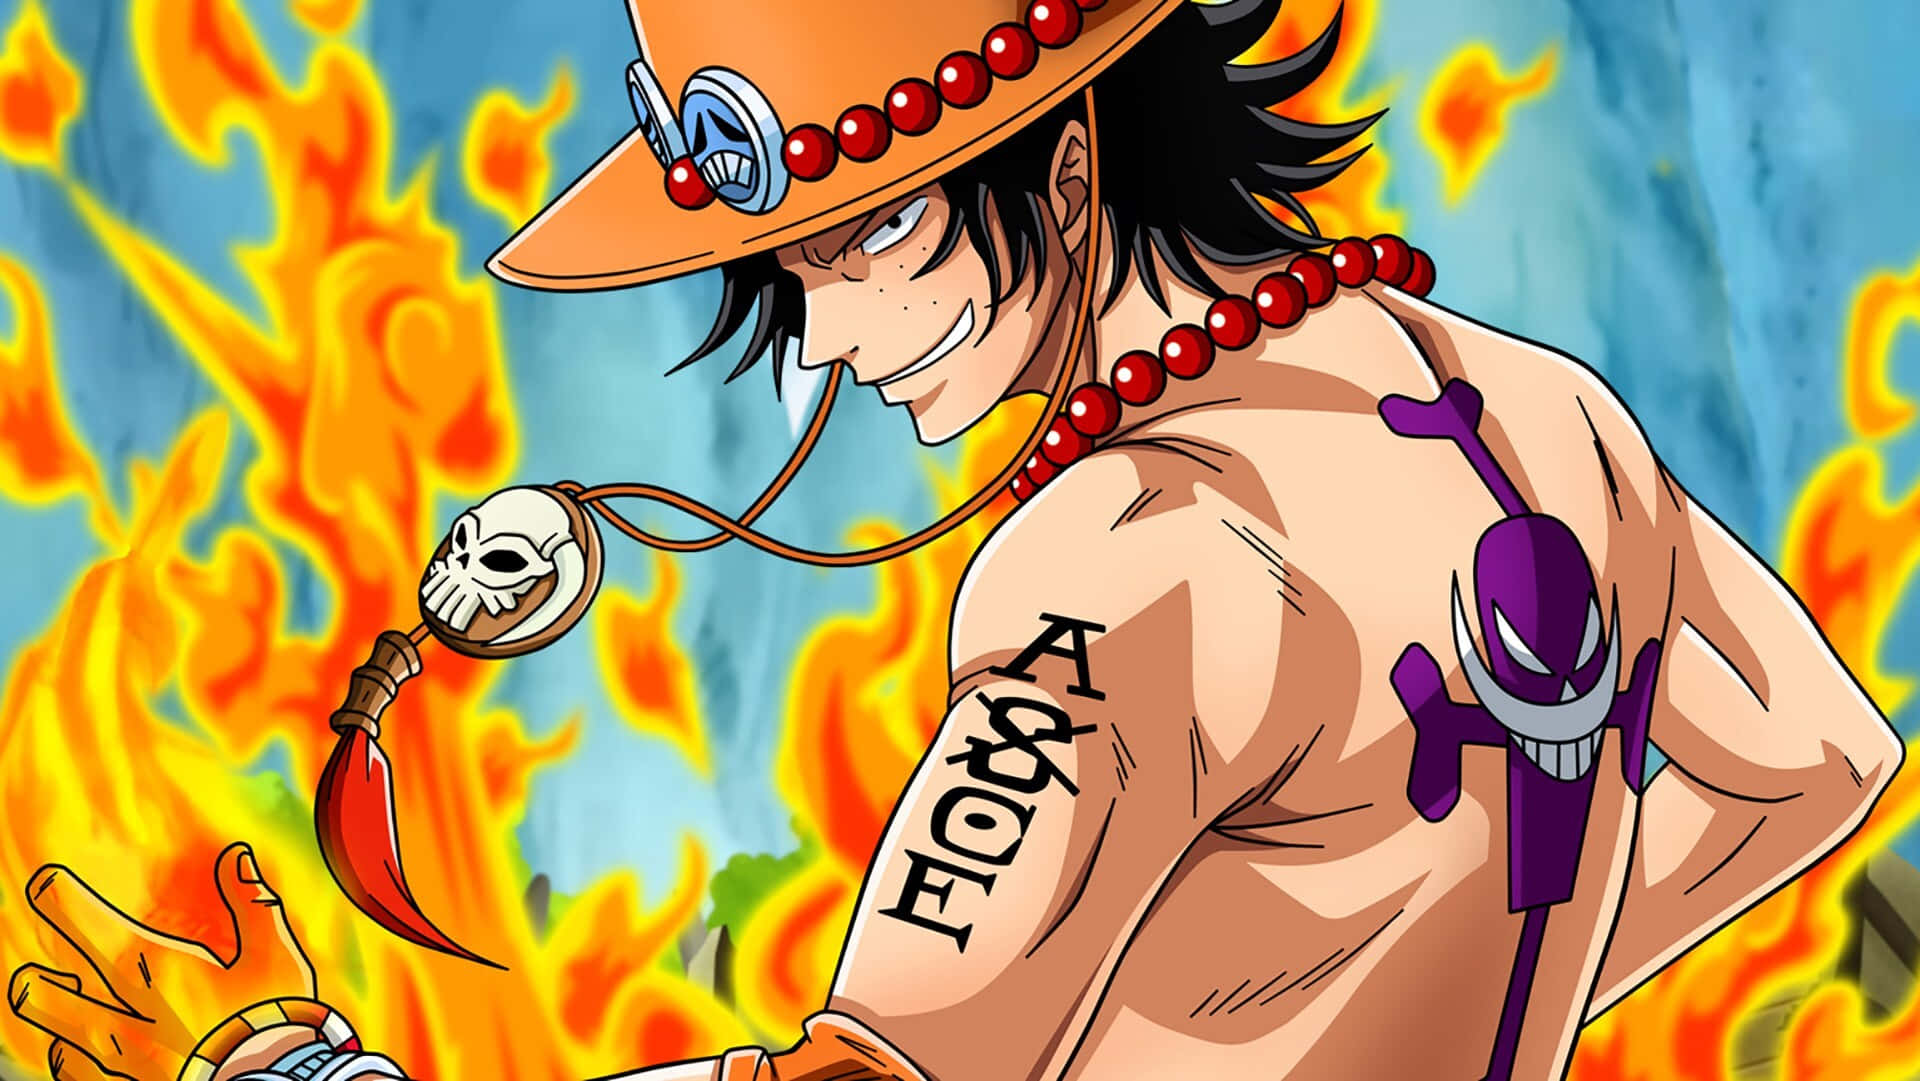 The Ultimate Power of Portgas D. Ace Wallpaper